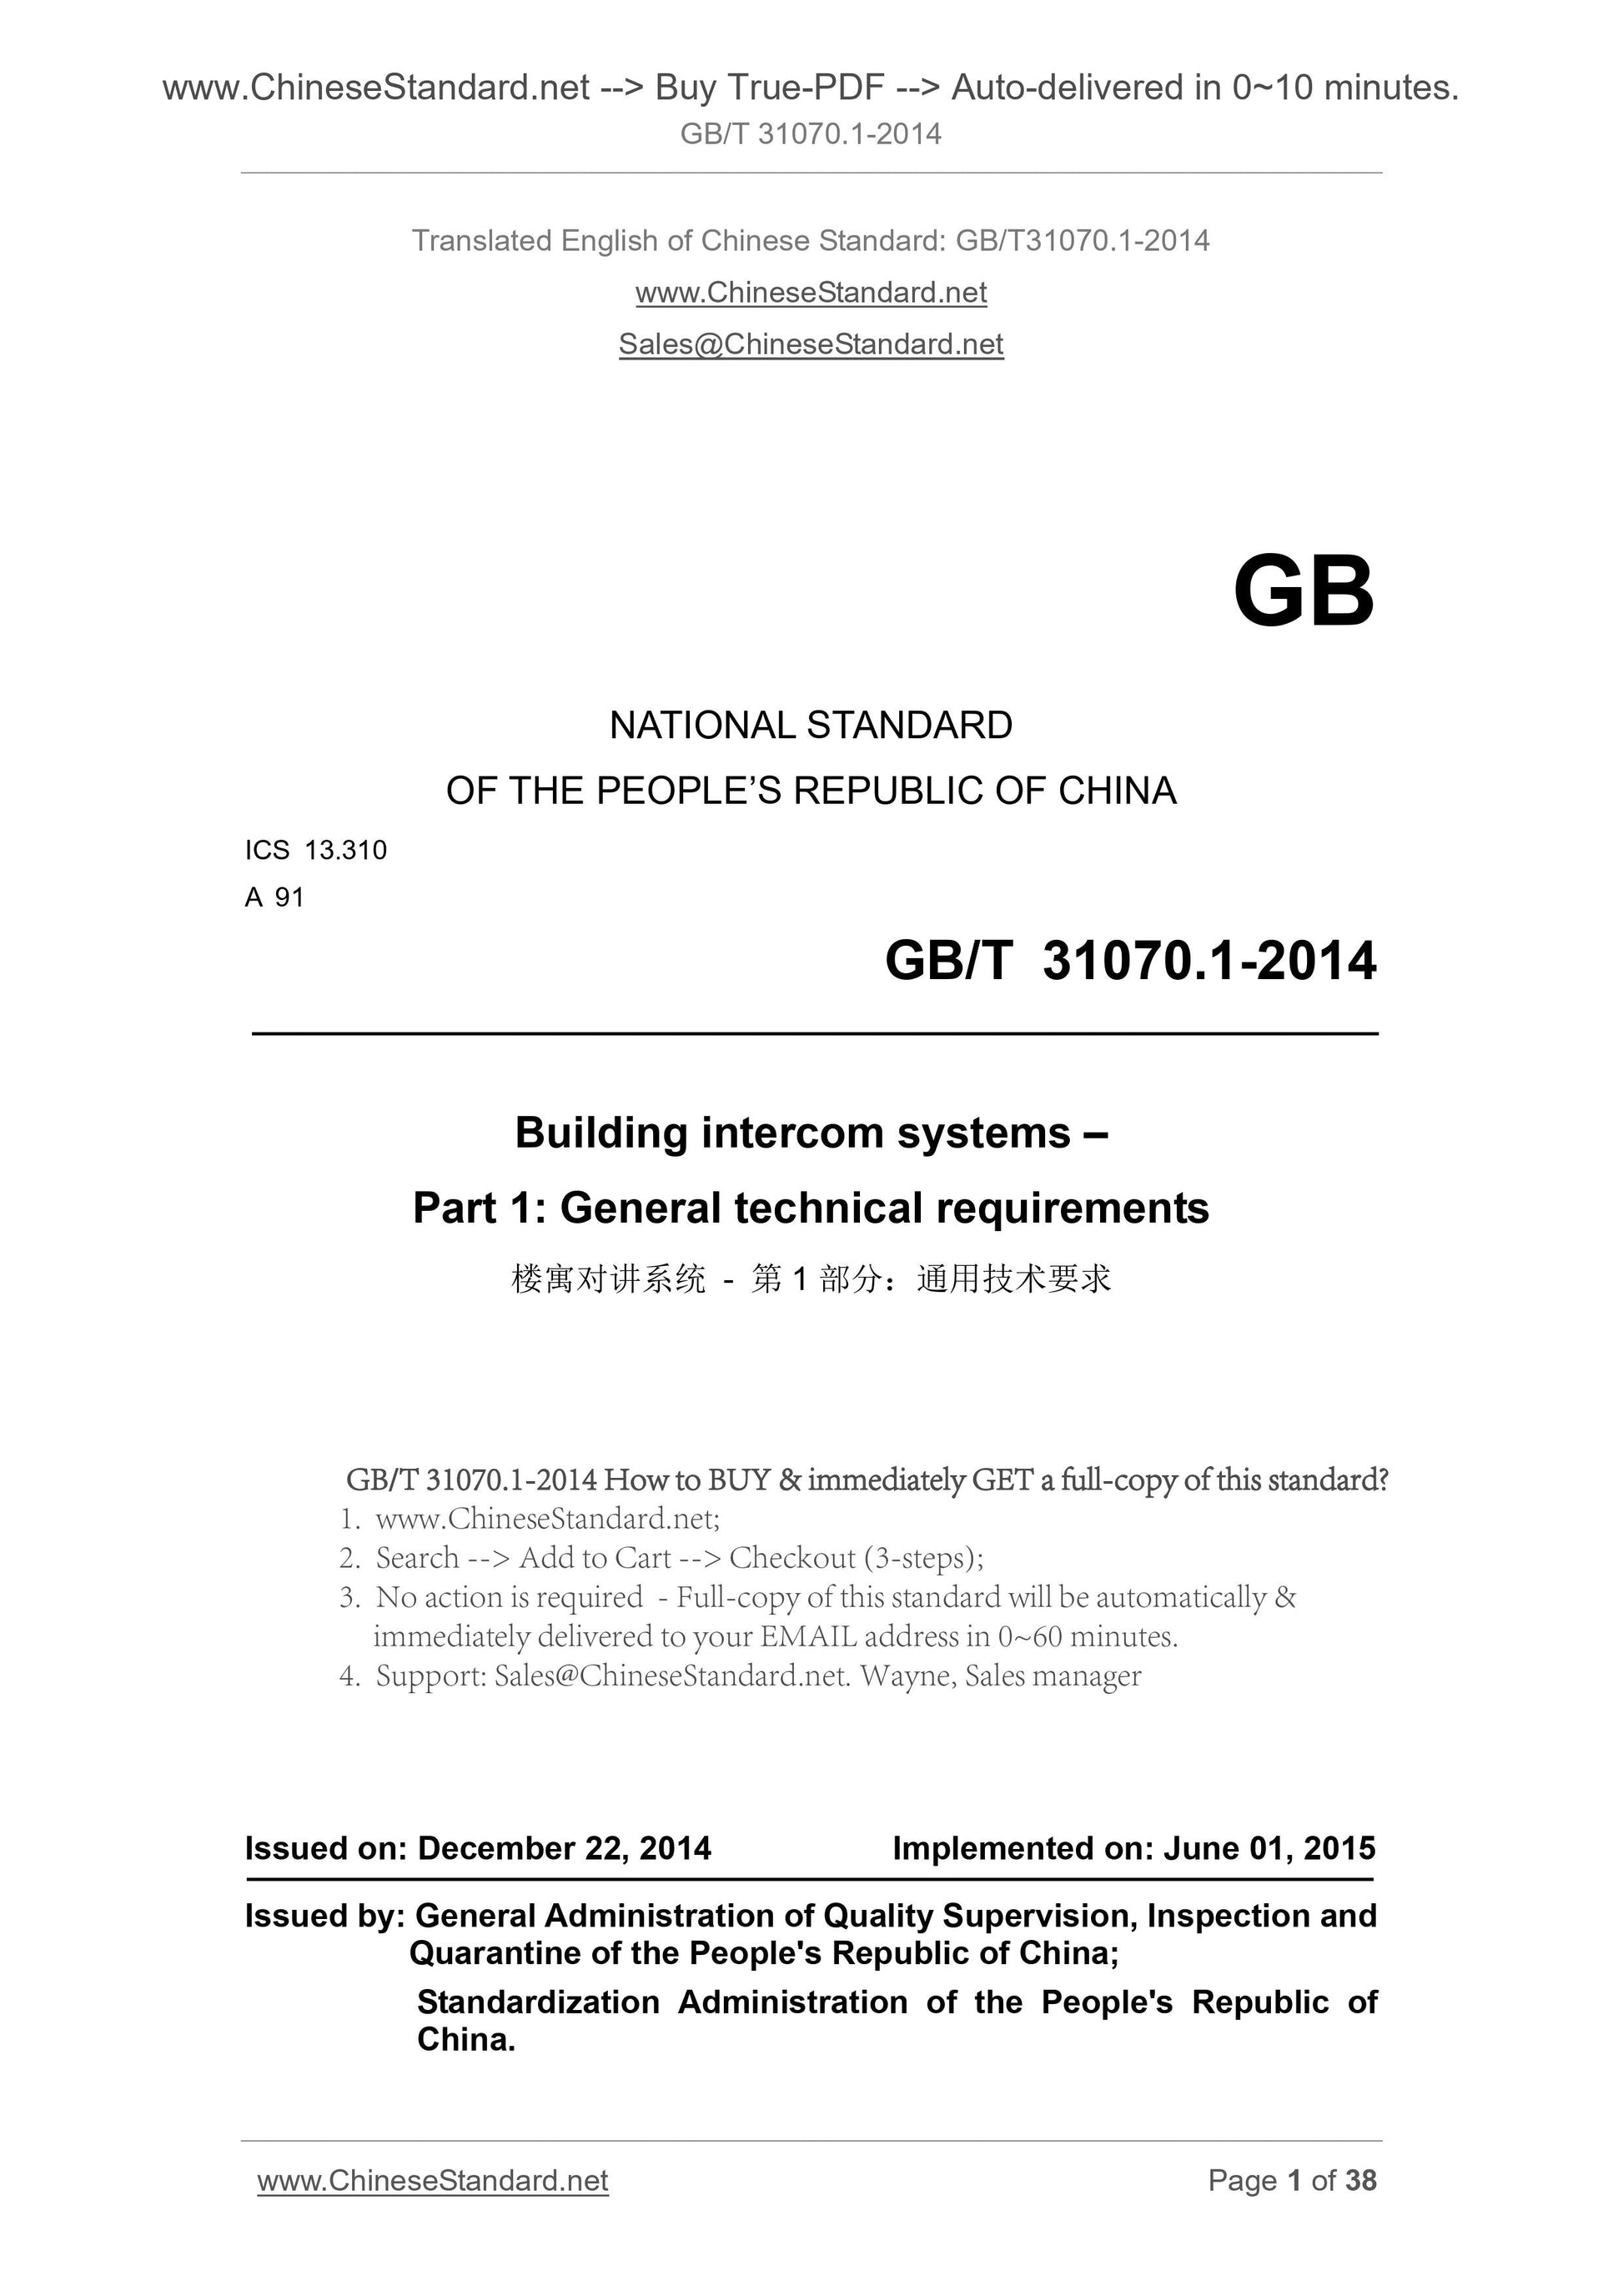 GB/T 31070.1-2014 Page 1